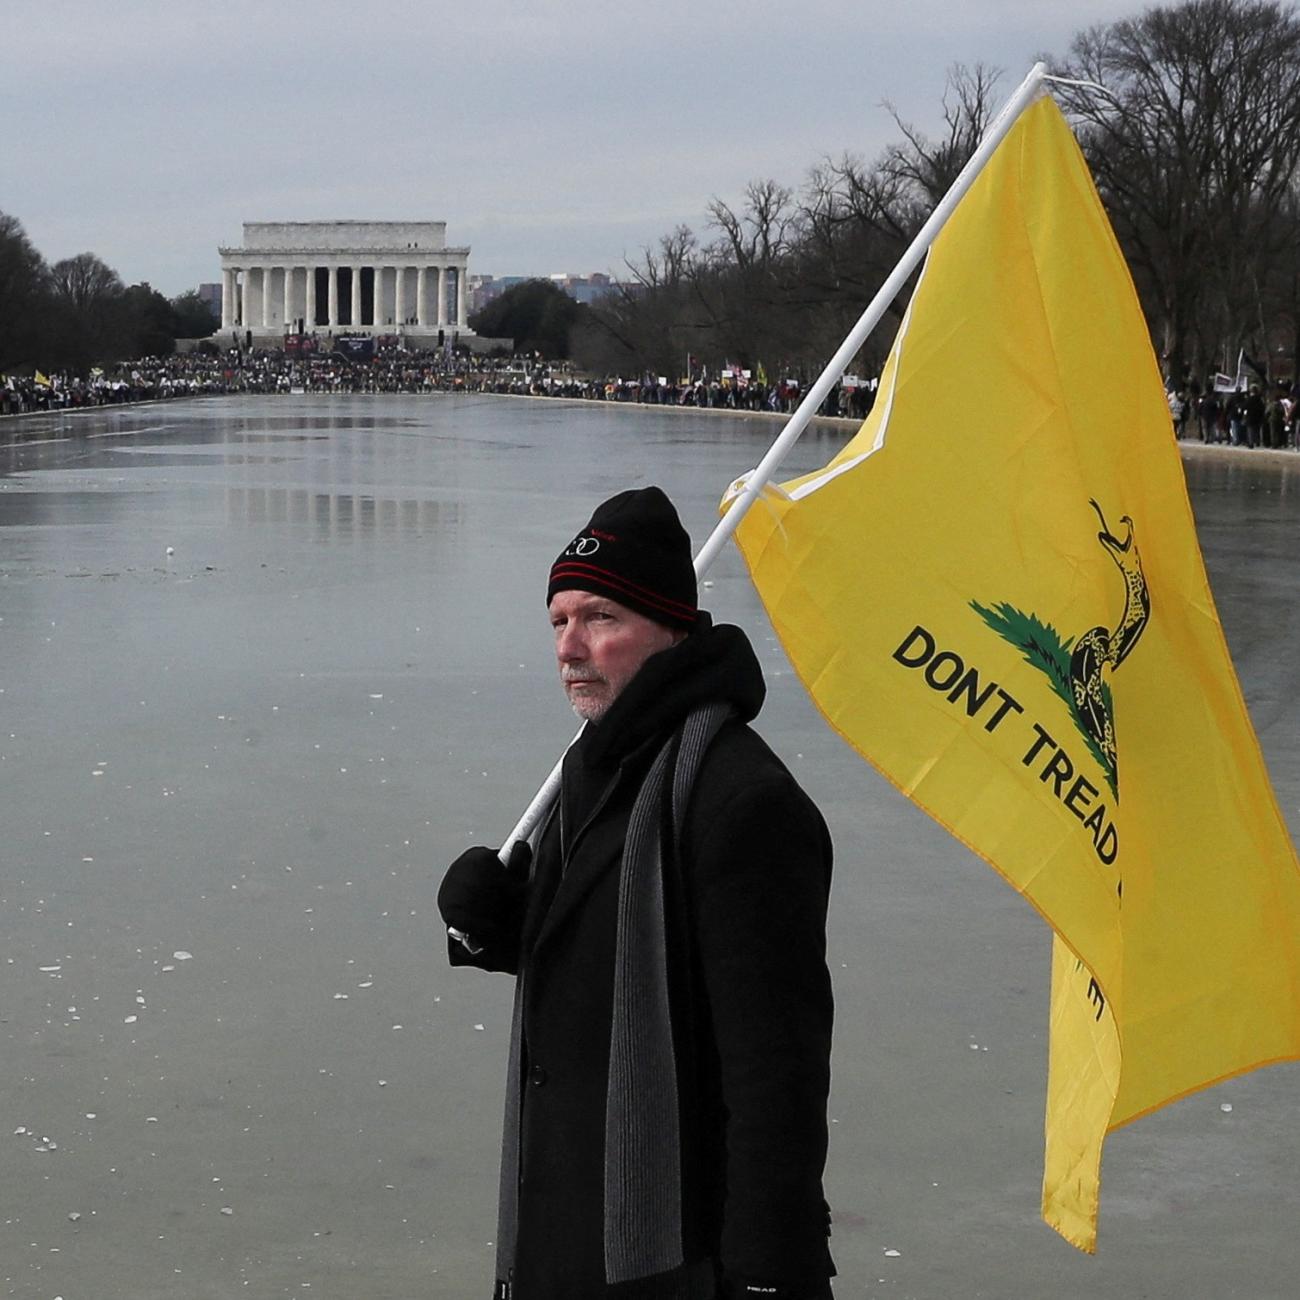 A man holds a flag during a march in opposition to coronavirus disease (COVID-19) mandates on the National Mall in Washington, D.C